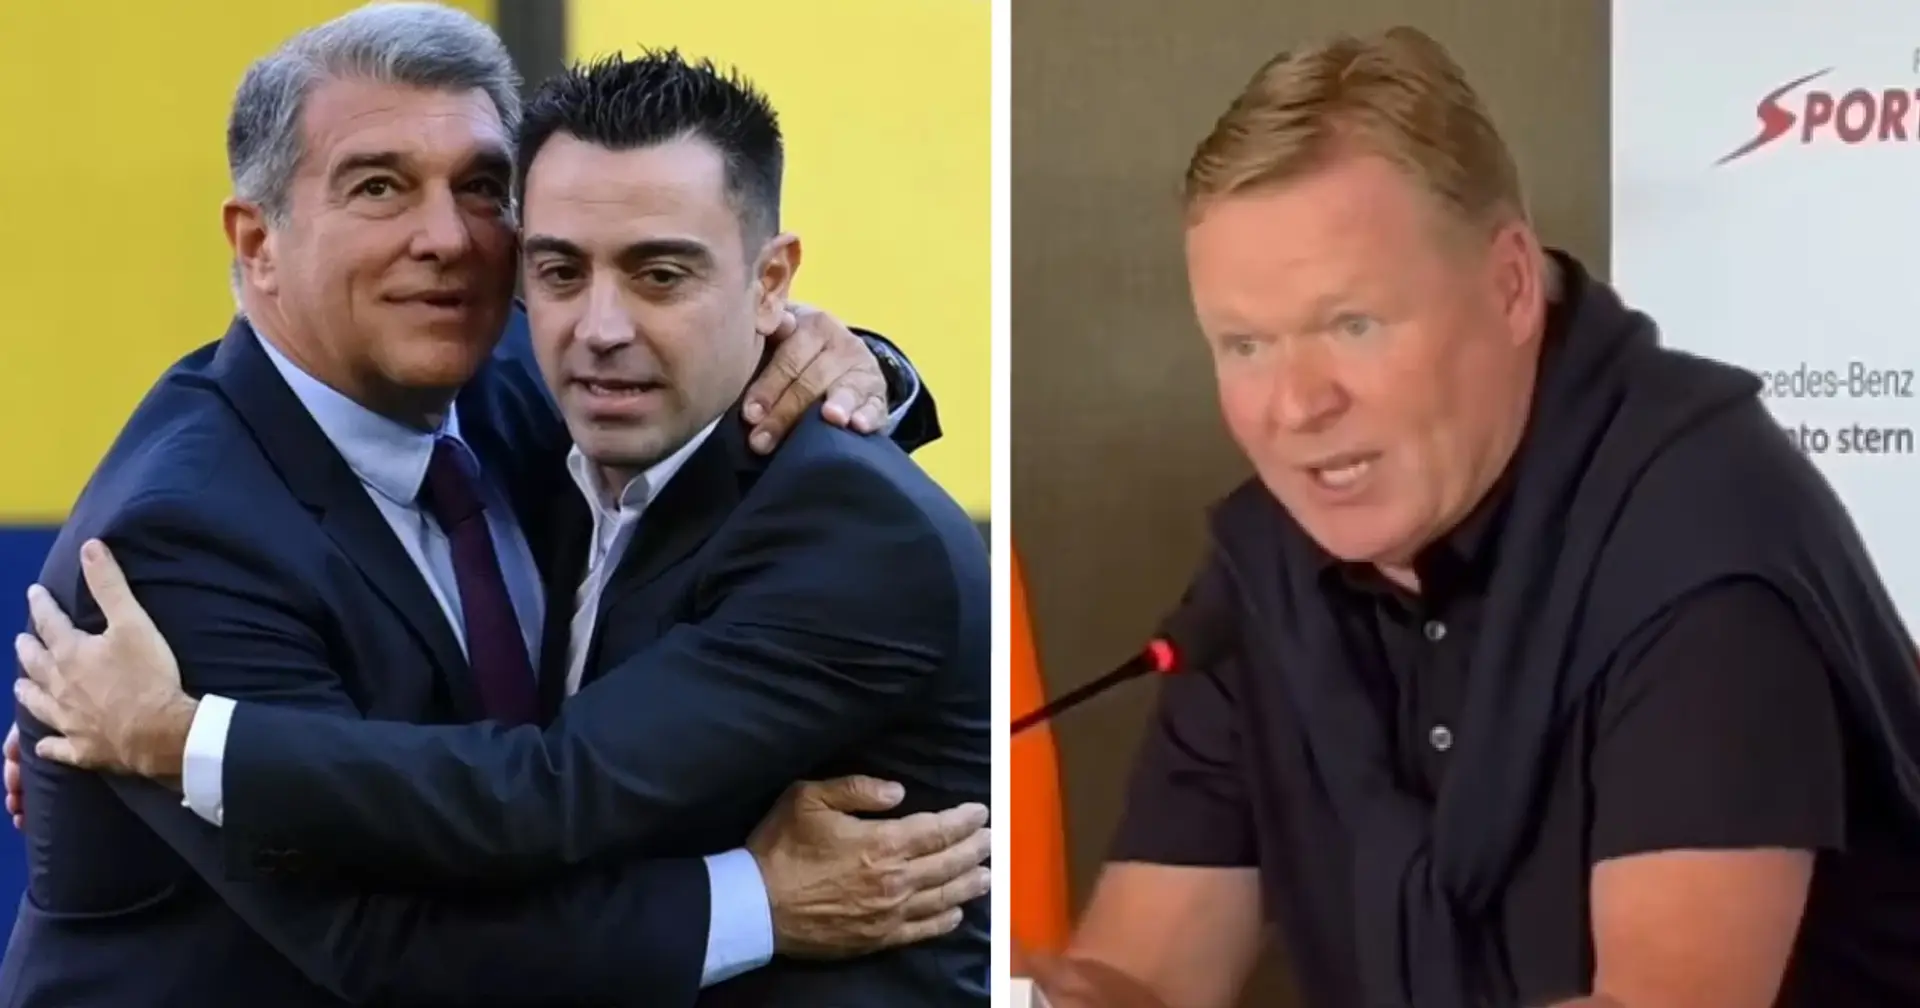 Ronald Koeman says Laporta has learned his lesson after sacking him